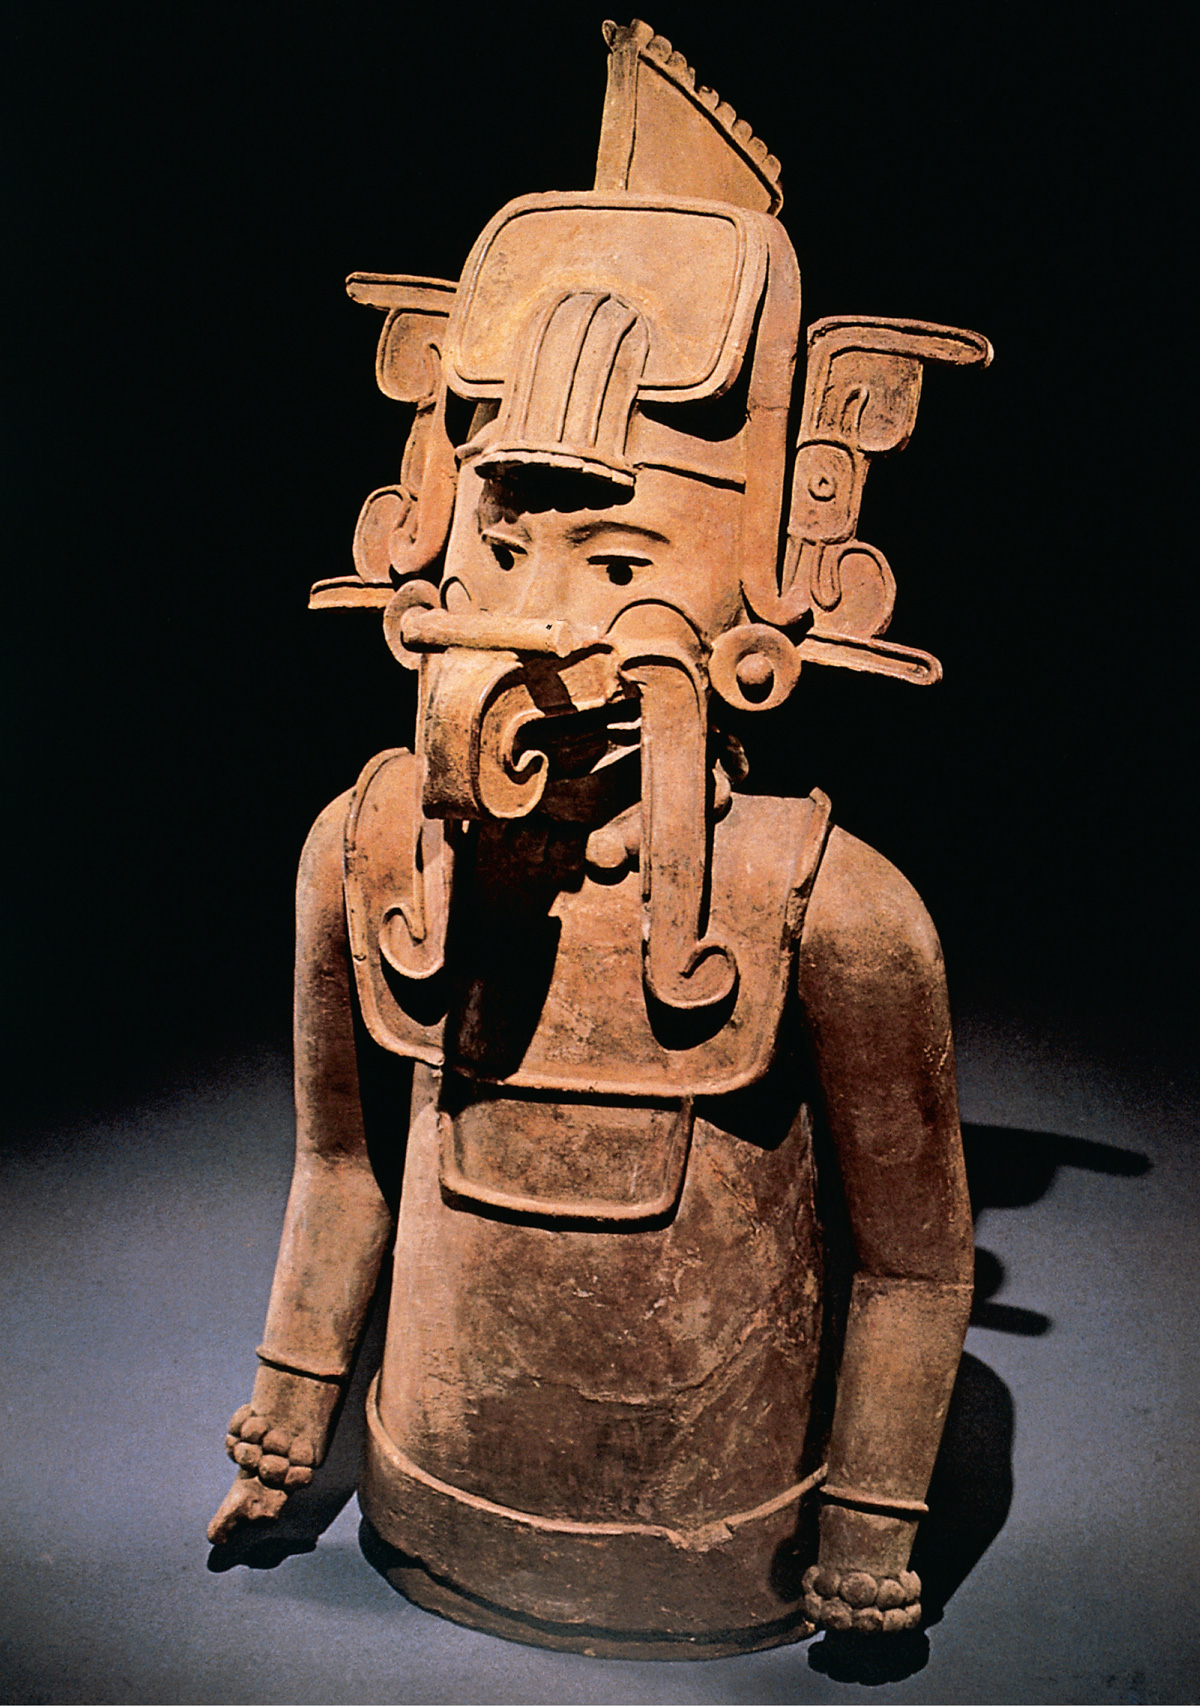 A sculpture of Ehecatl, the Mesoamerican wind god, attributed to Lara. Currently in the collection of the Metropolitan Museum of Art, New York.